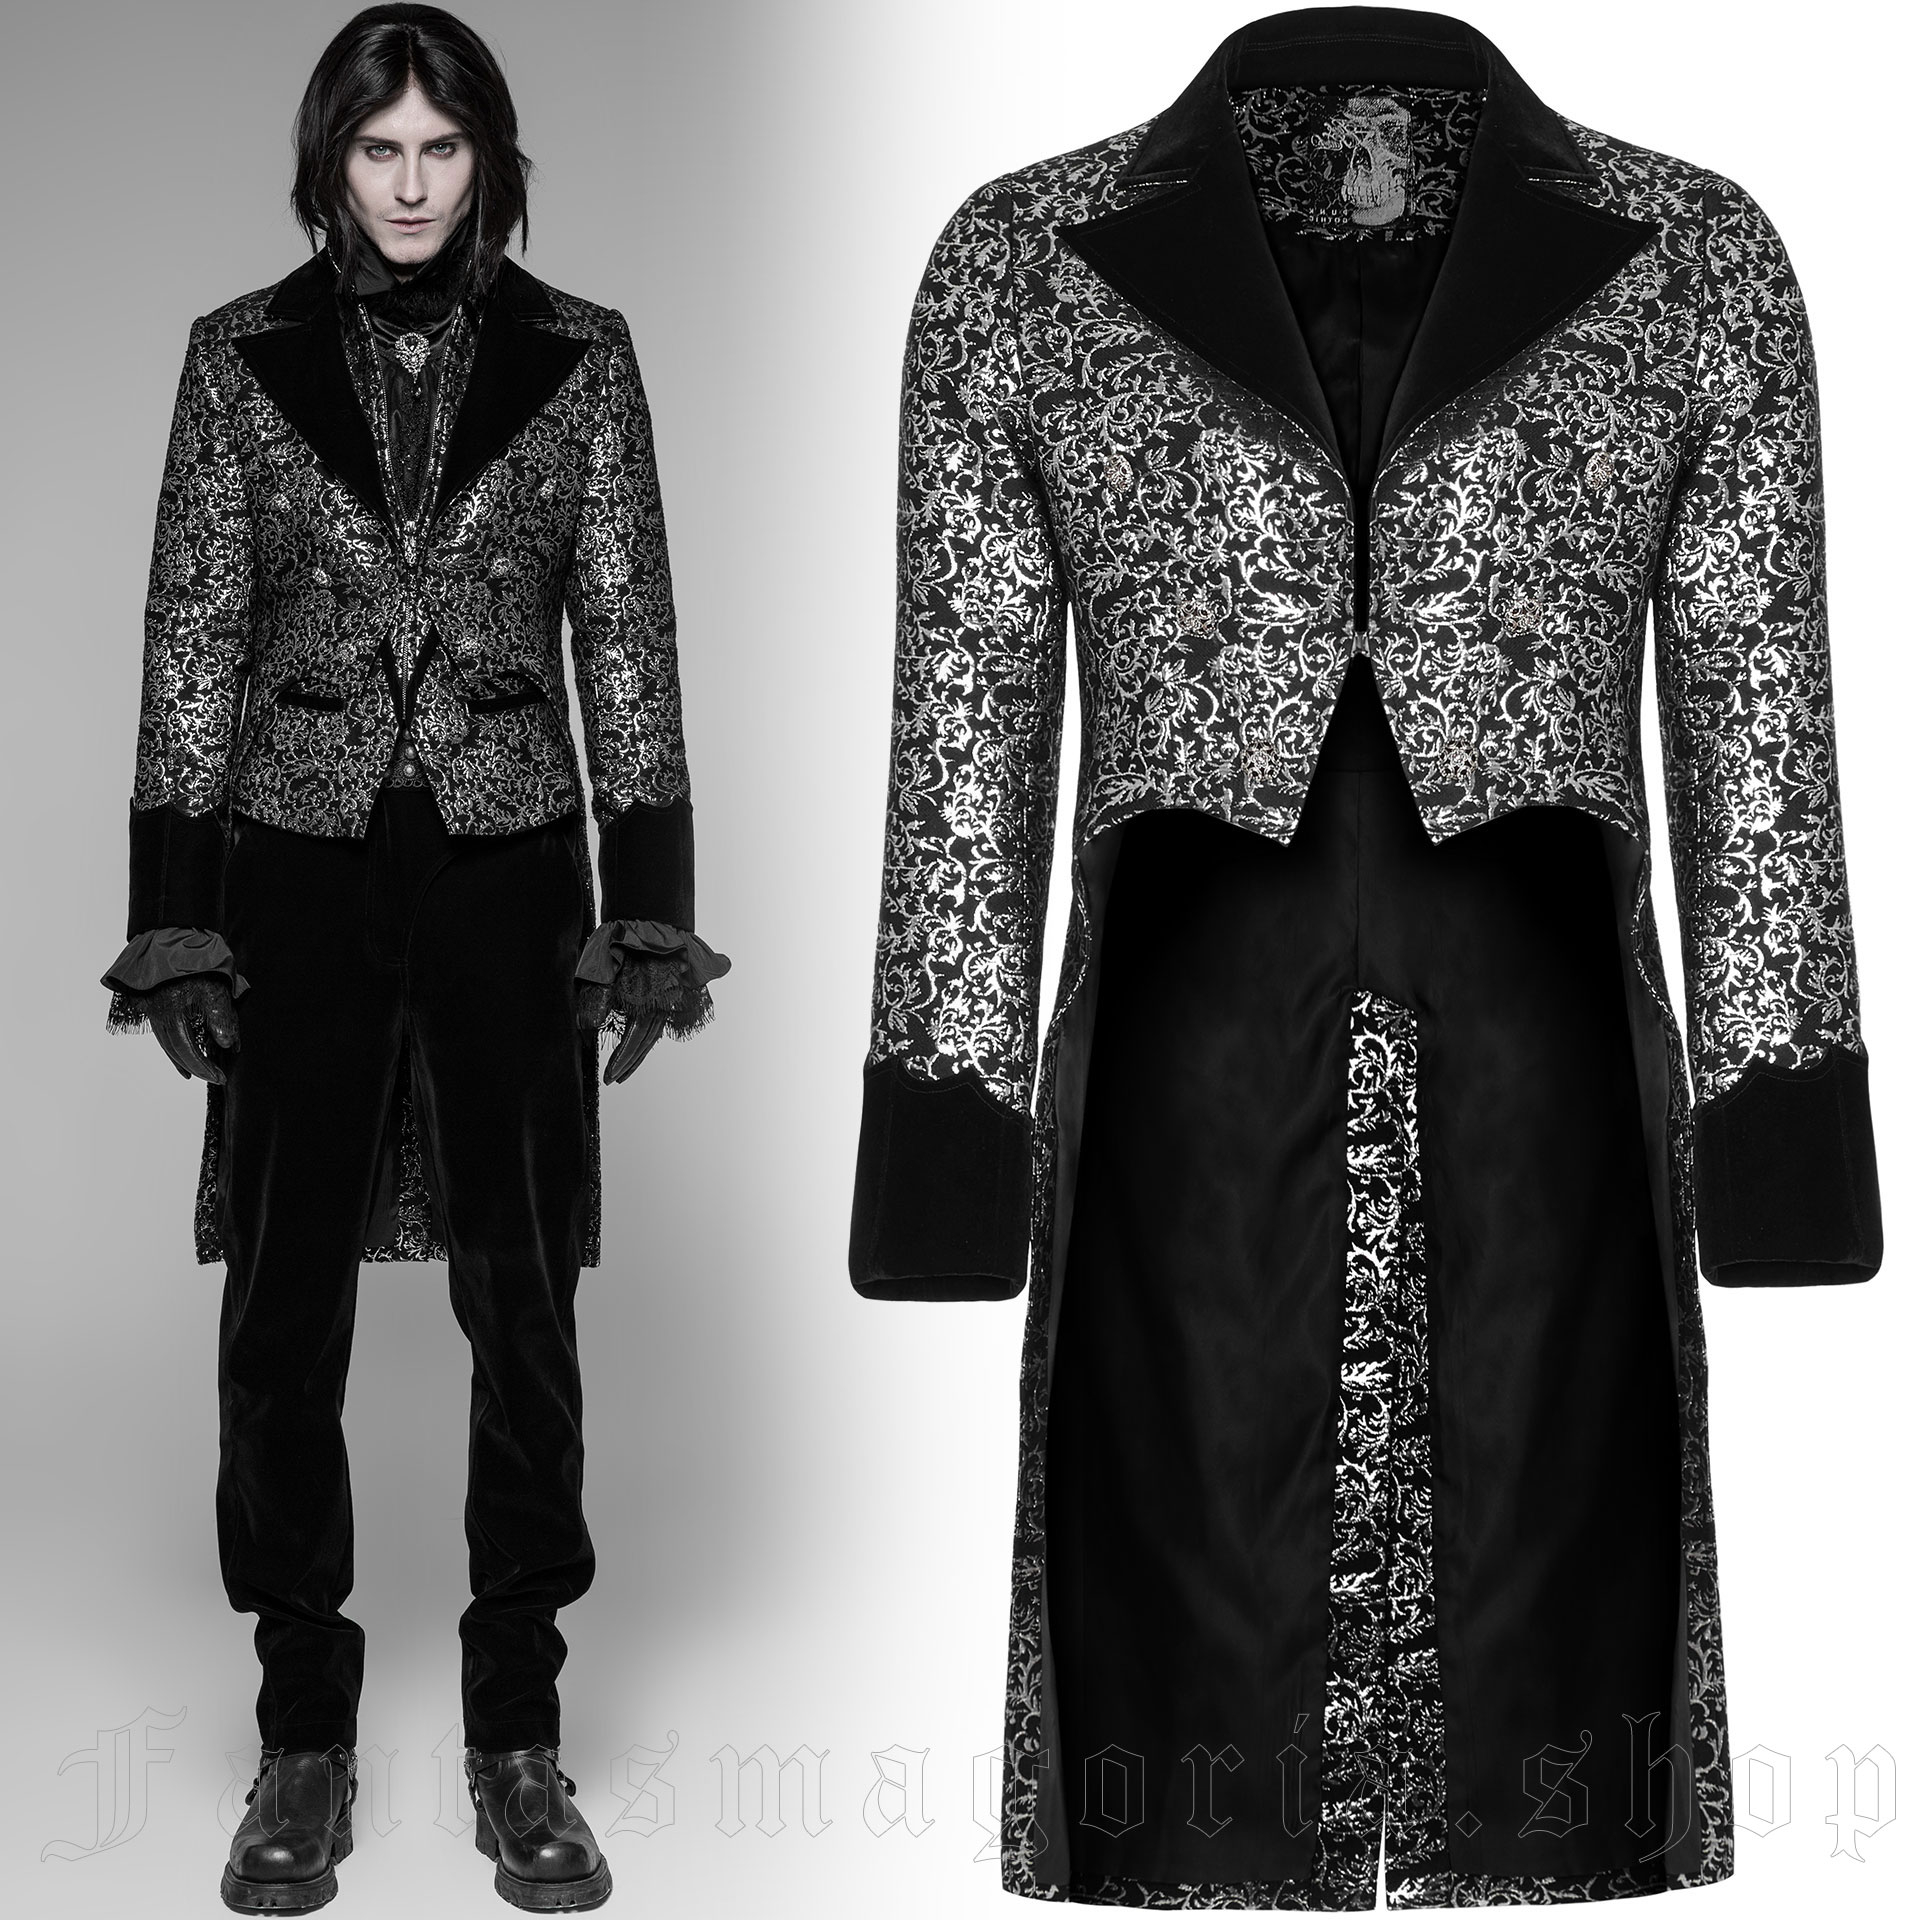 Black and silver brocade tailcoat by Punk Rave.. Punk Rave